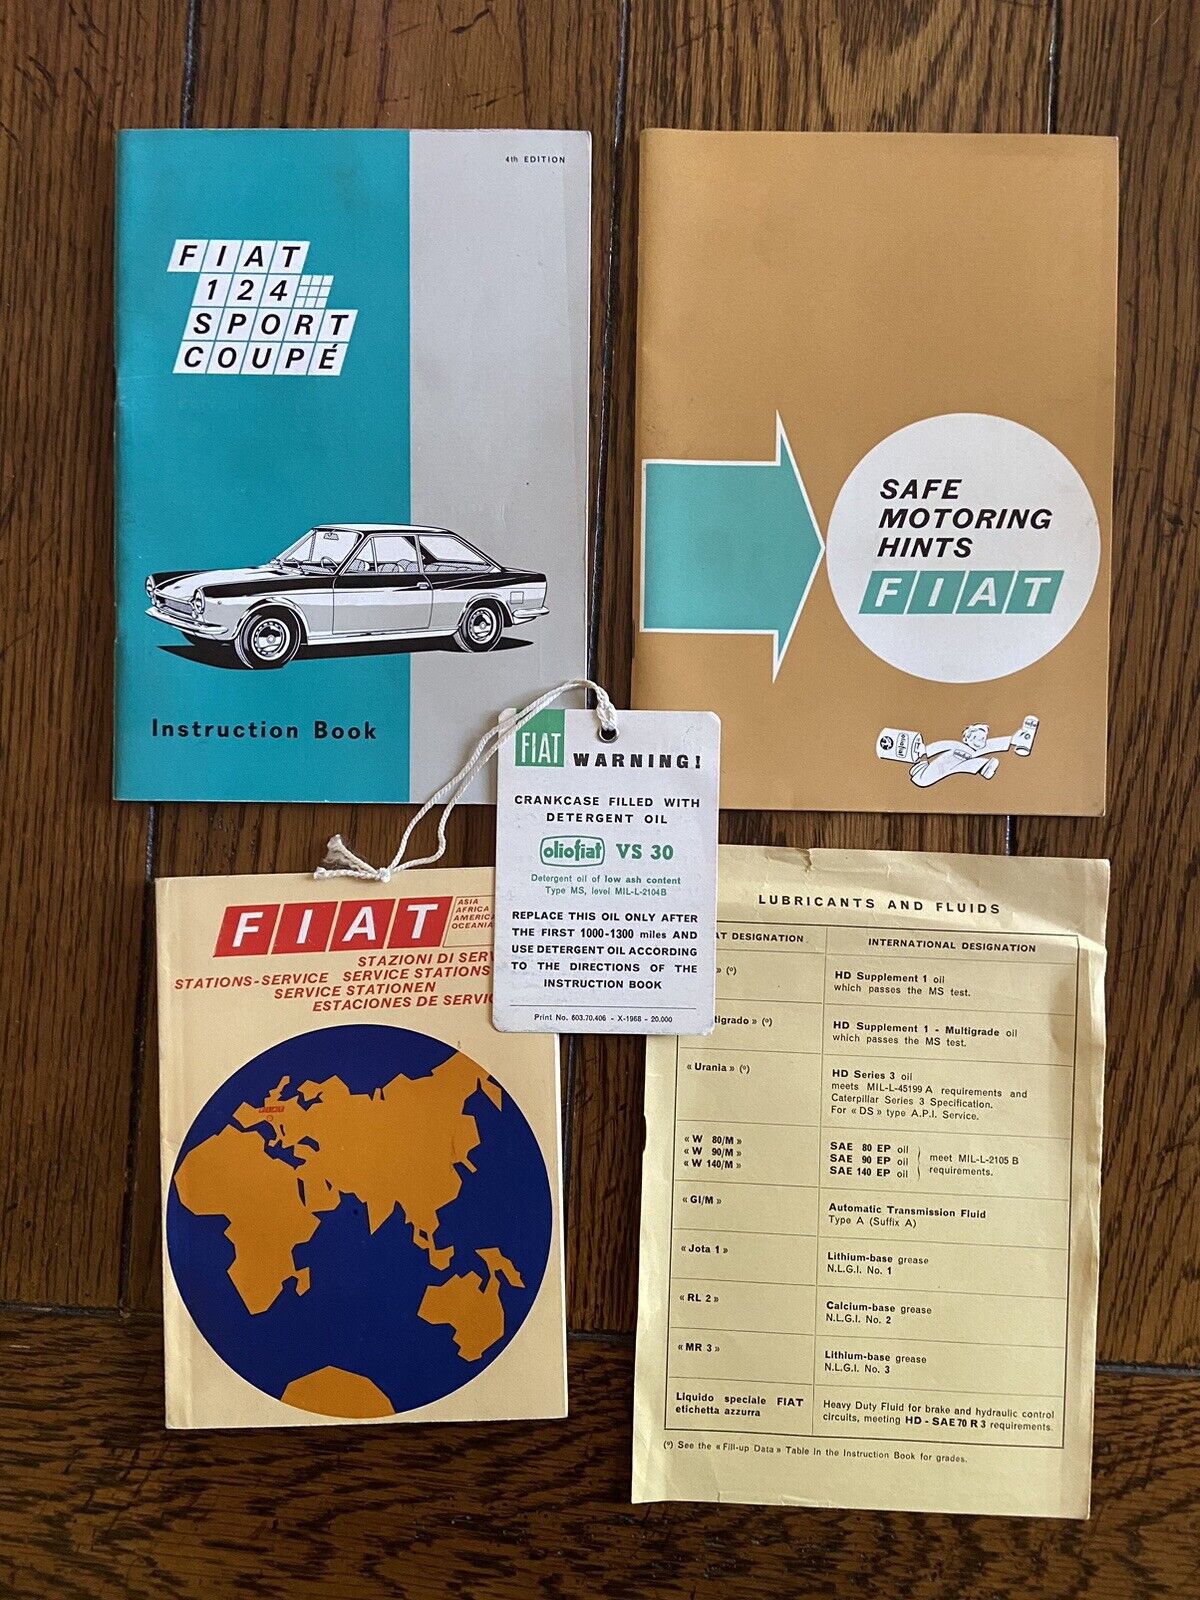 Vintage Fiat Instruction Book 124 Sport Coupe and Safe Motoring Hints 1968